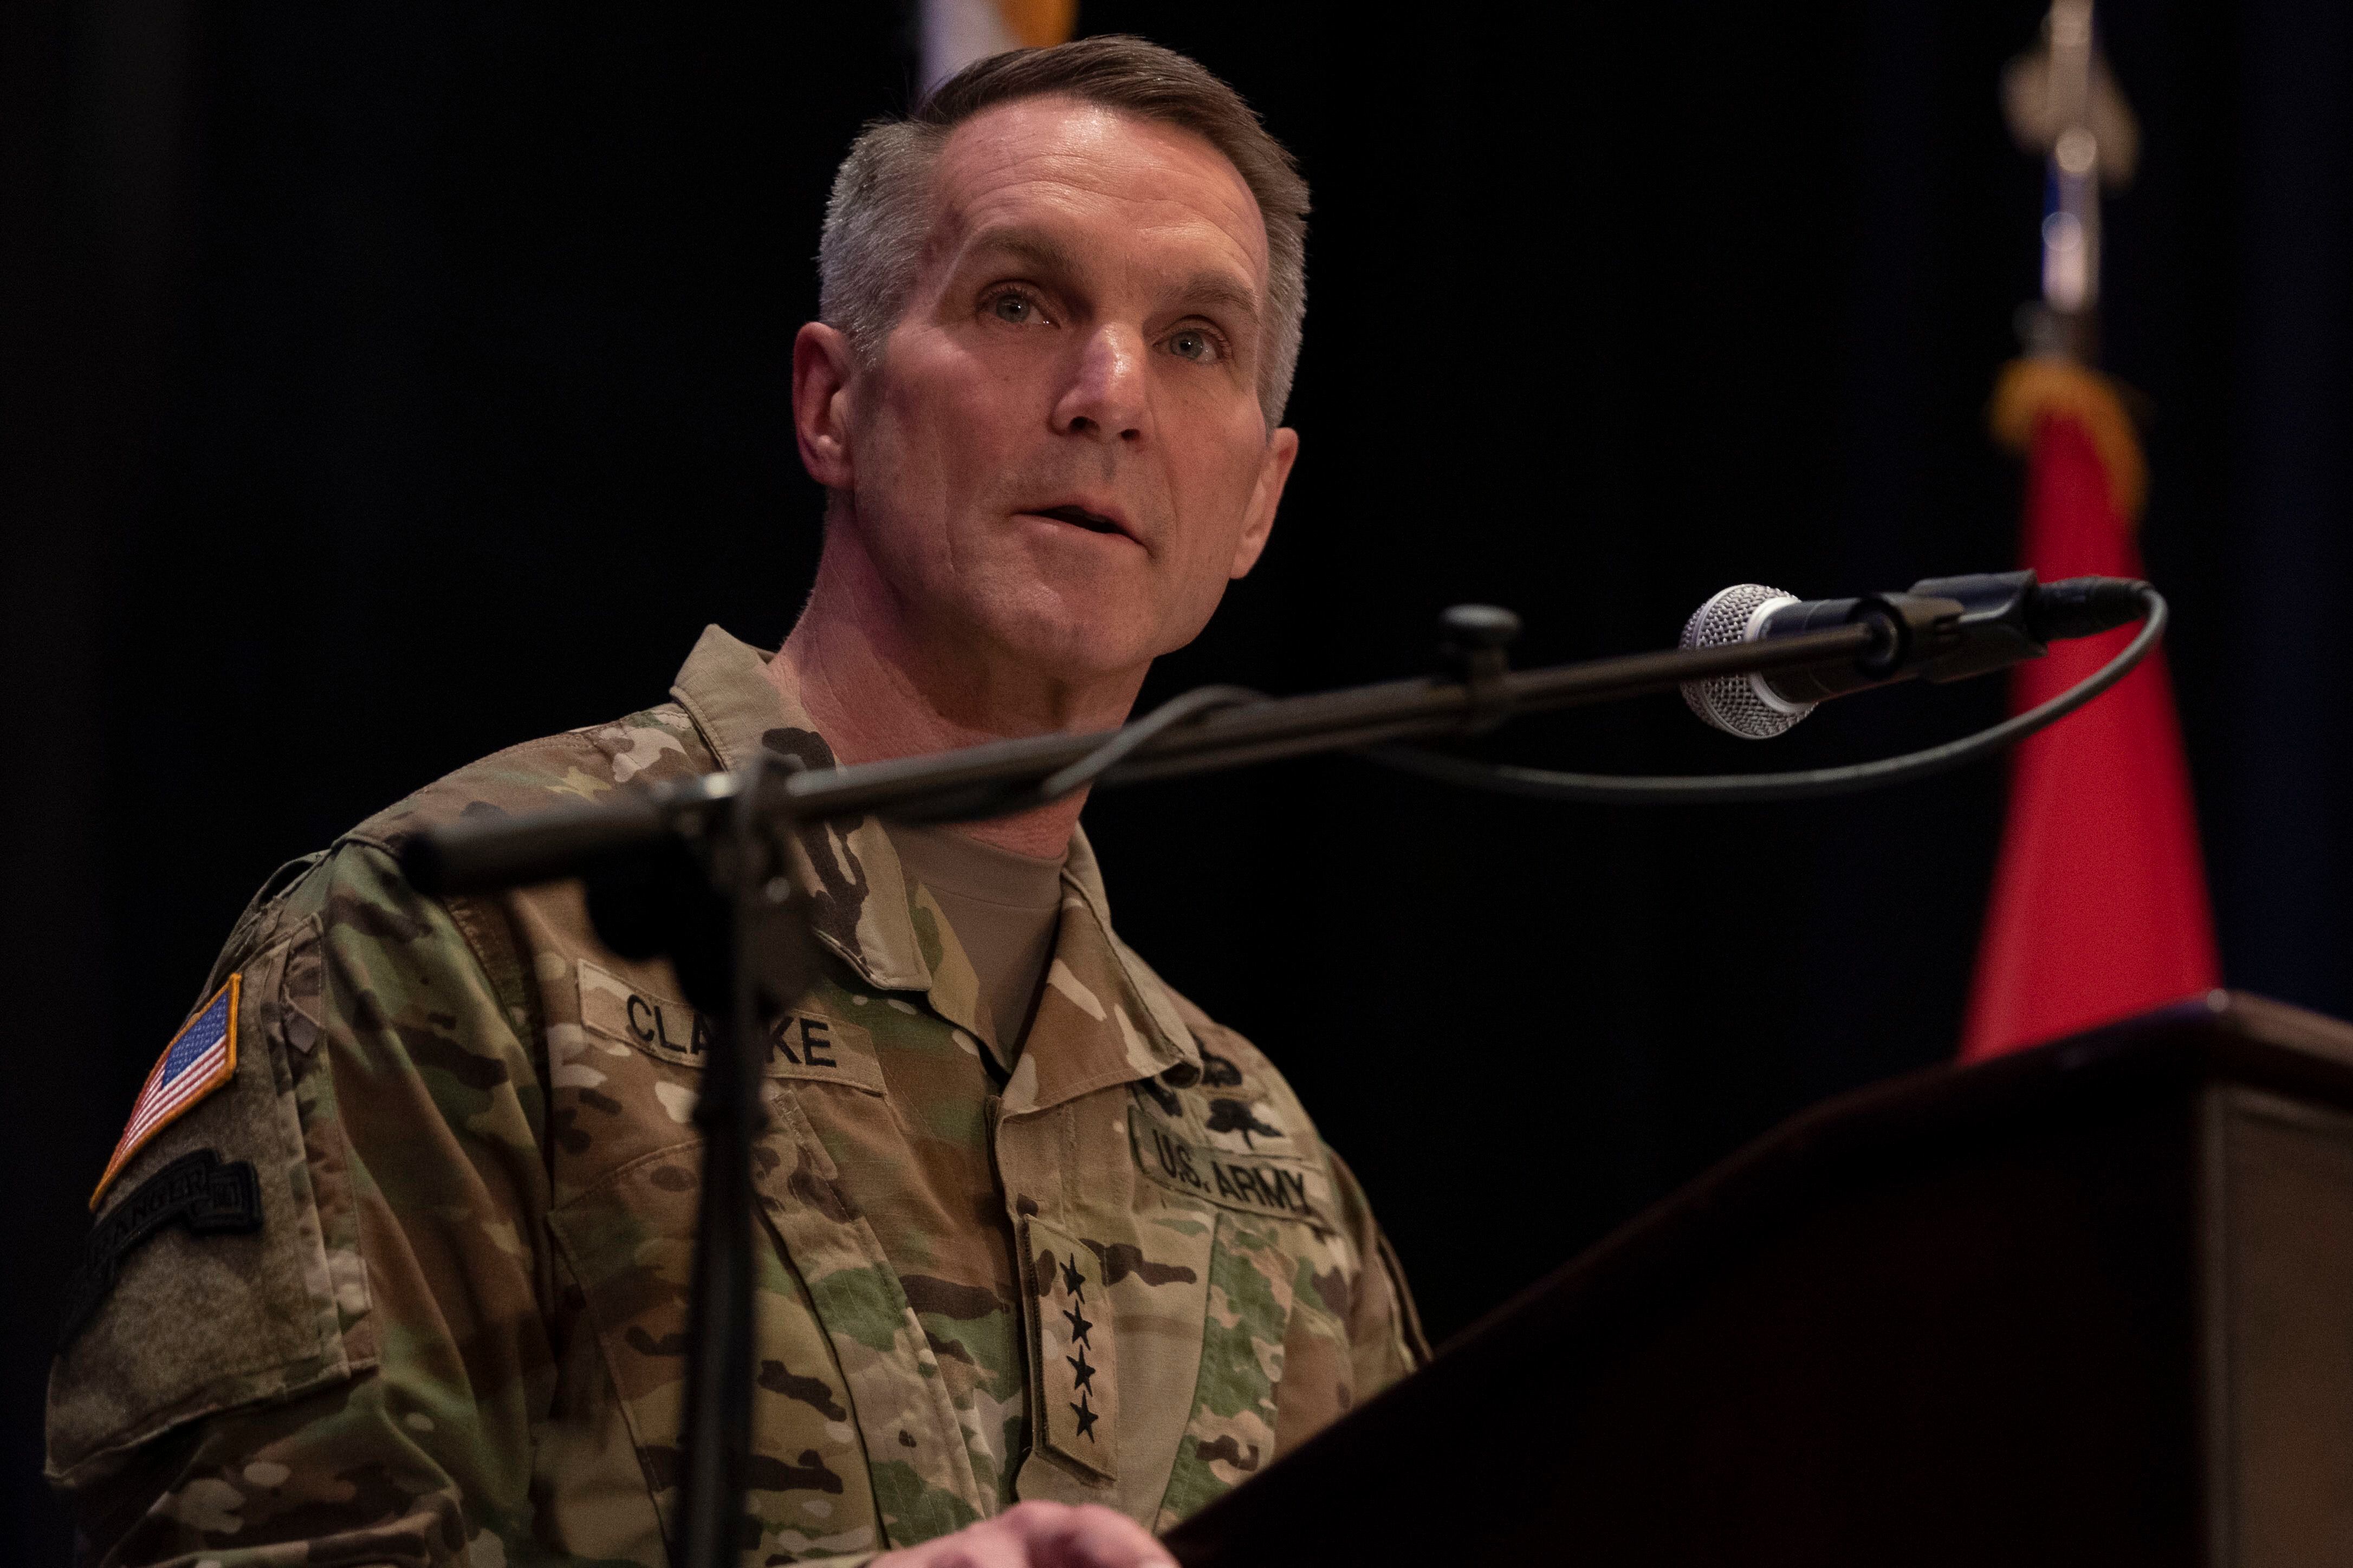 Special ops leader issues warning over information warfare capabilities, funding